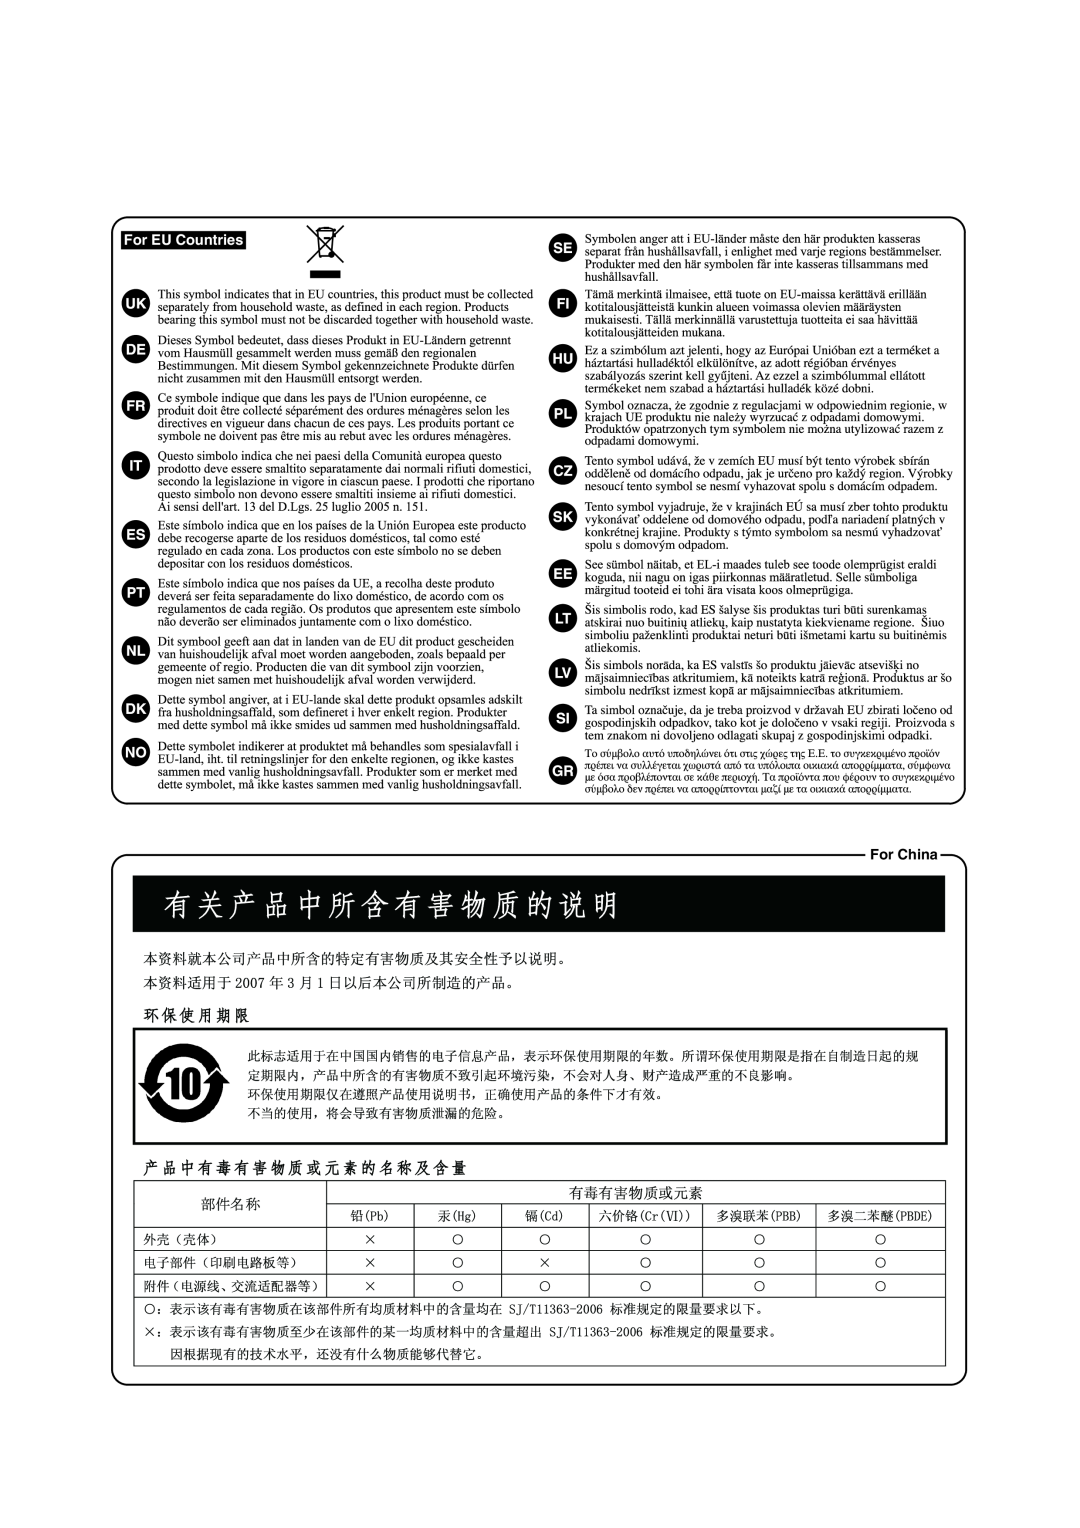 Roland S-OPT owner manual For EU Countries, For China 